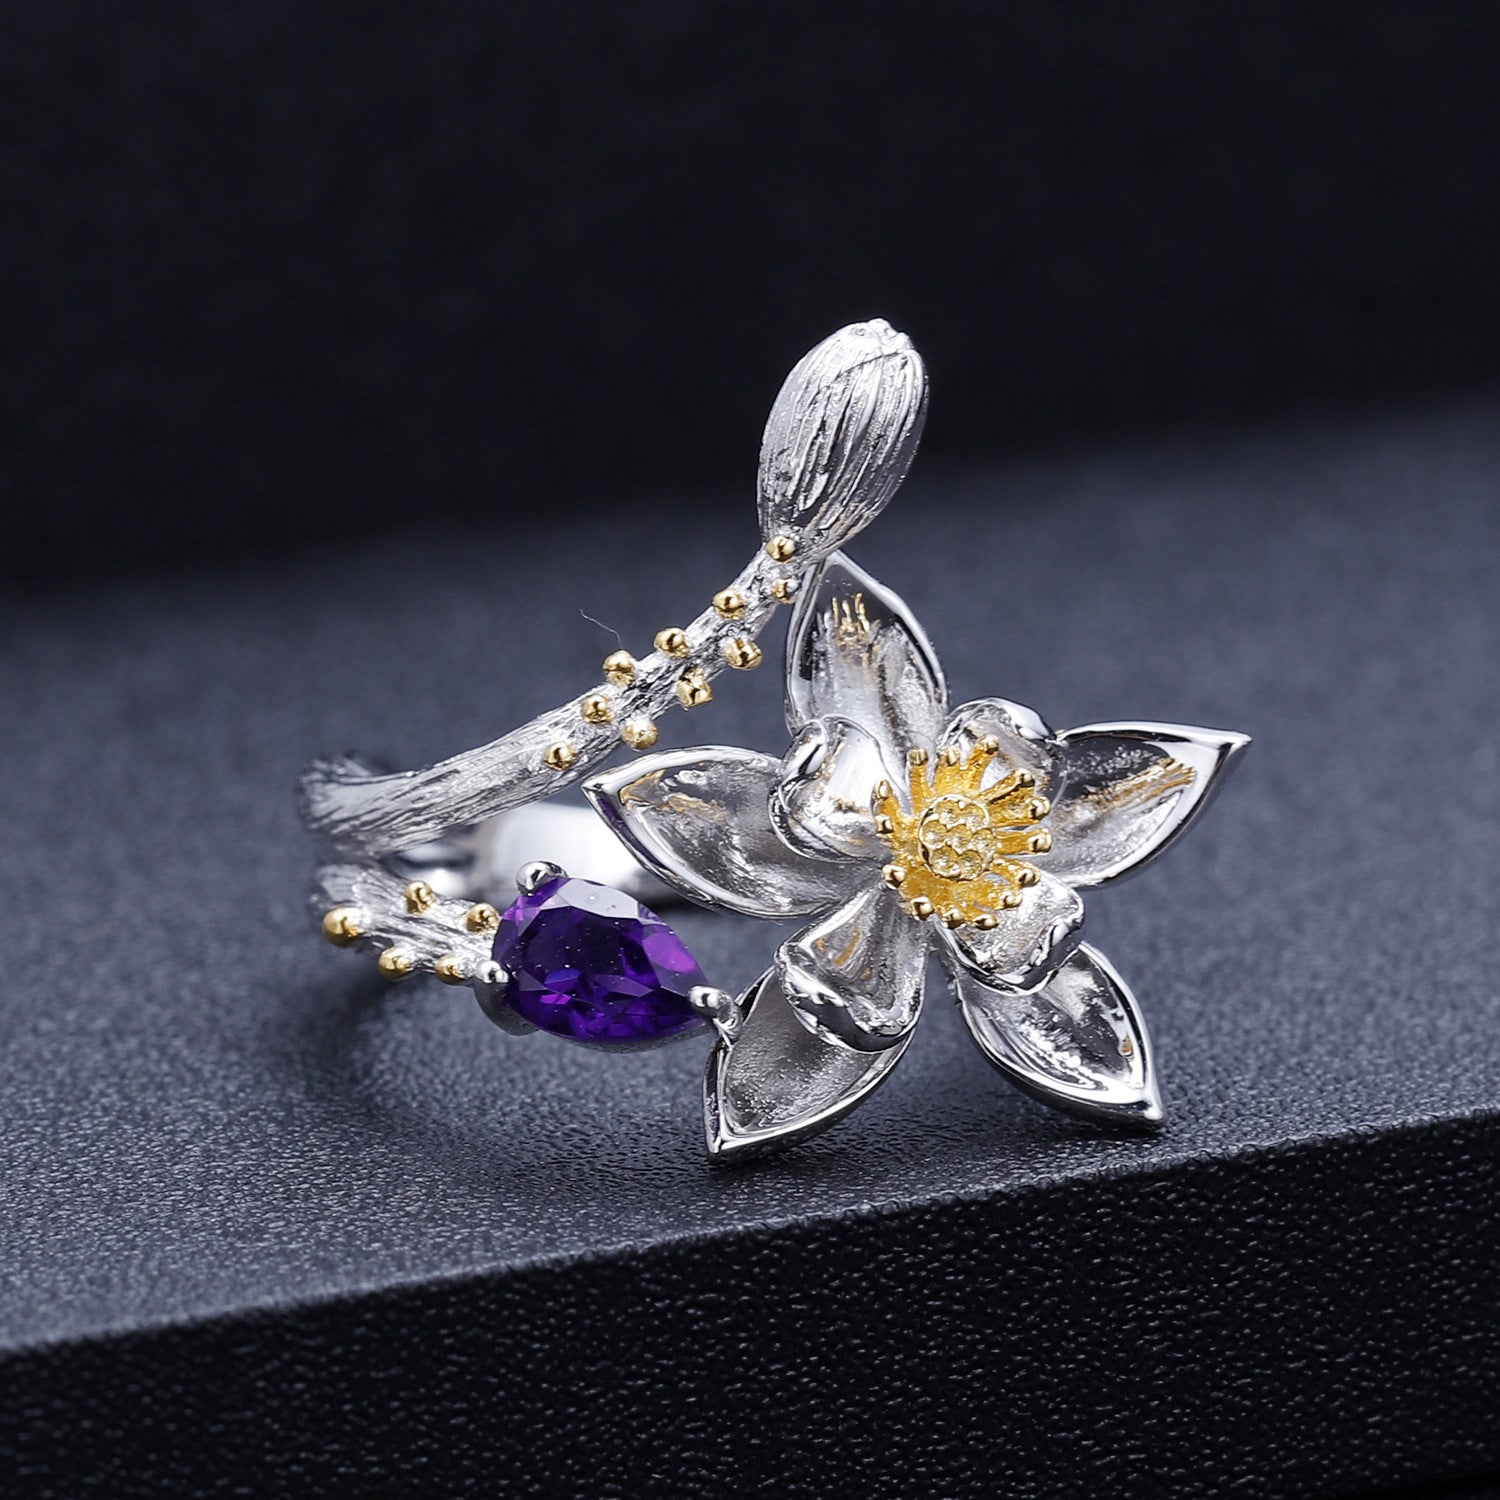 Floral Design with Natural Gem S925 Silver Ring for Women